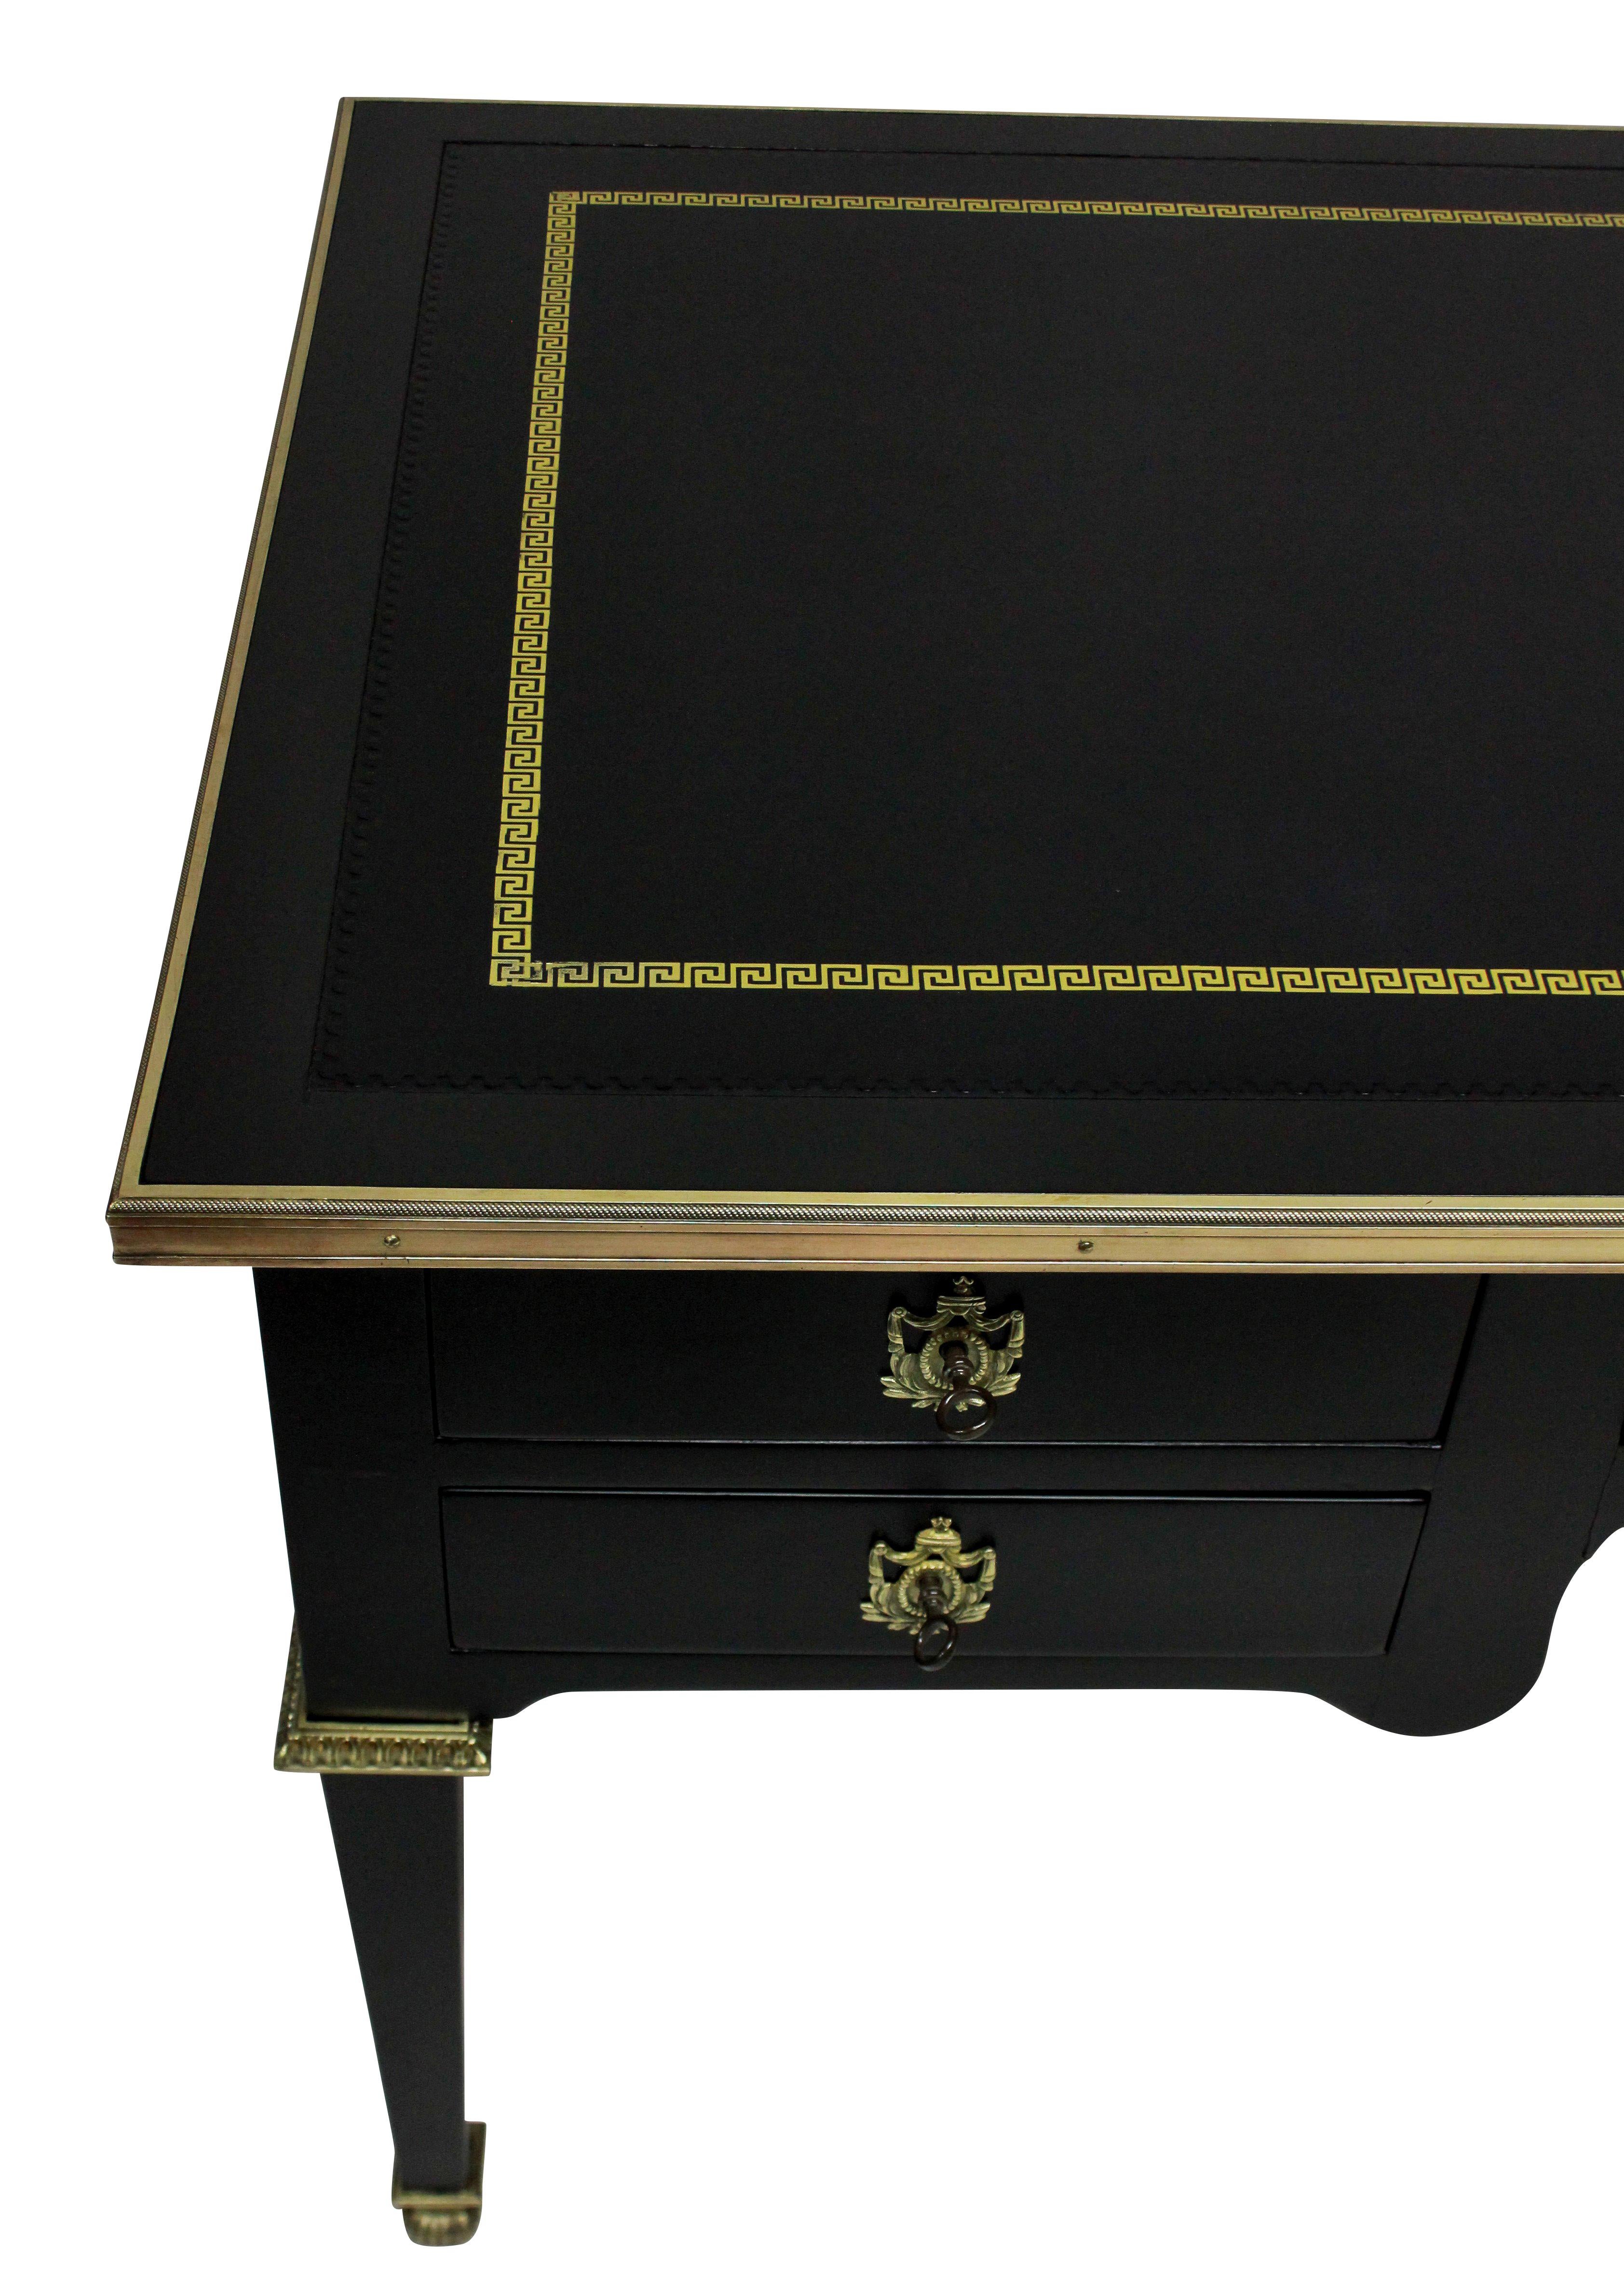 A fine French Louis XVI style desk in ebonized walnut with a leather top with Greek key border. The gilt bronze mounts and escutcheons of good quality and each drawer have a separate key.
Measures: 57 cm high knee hole.
  